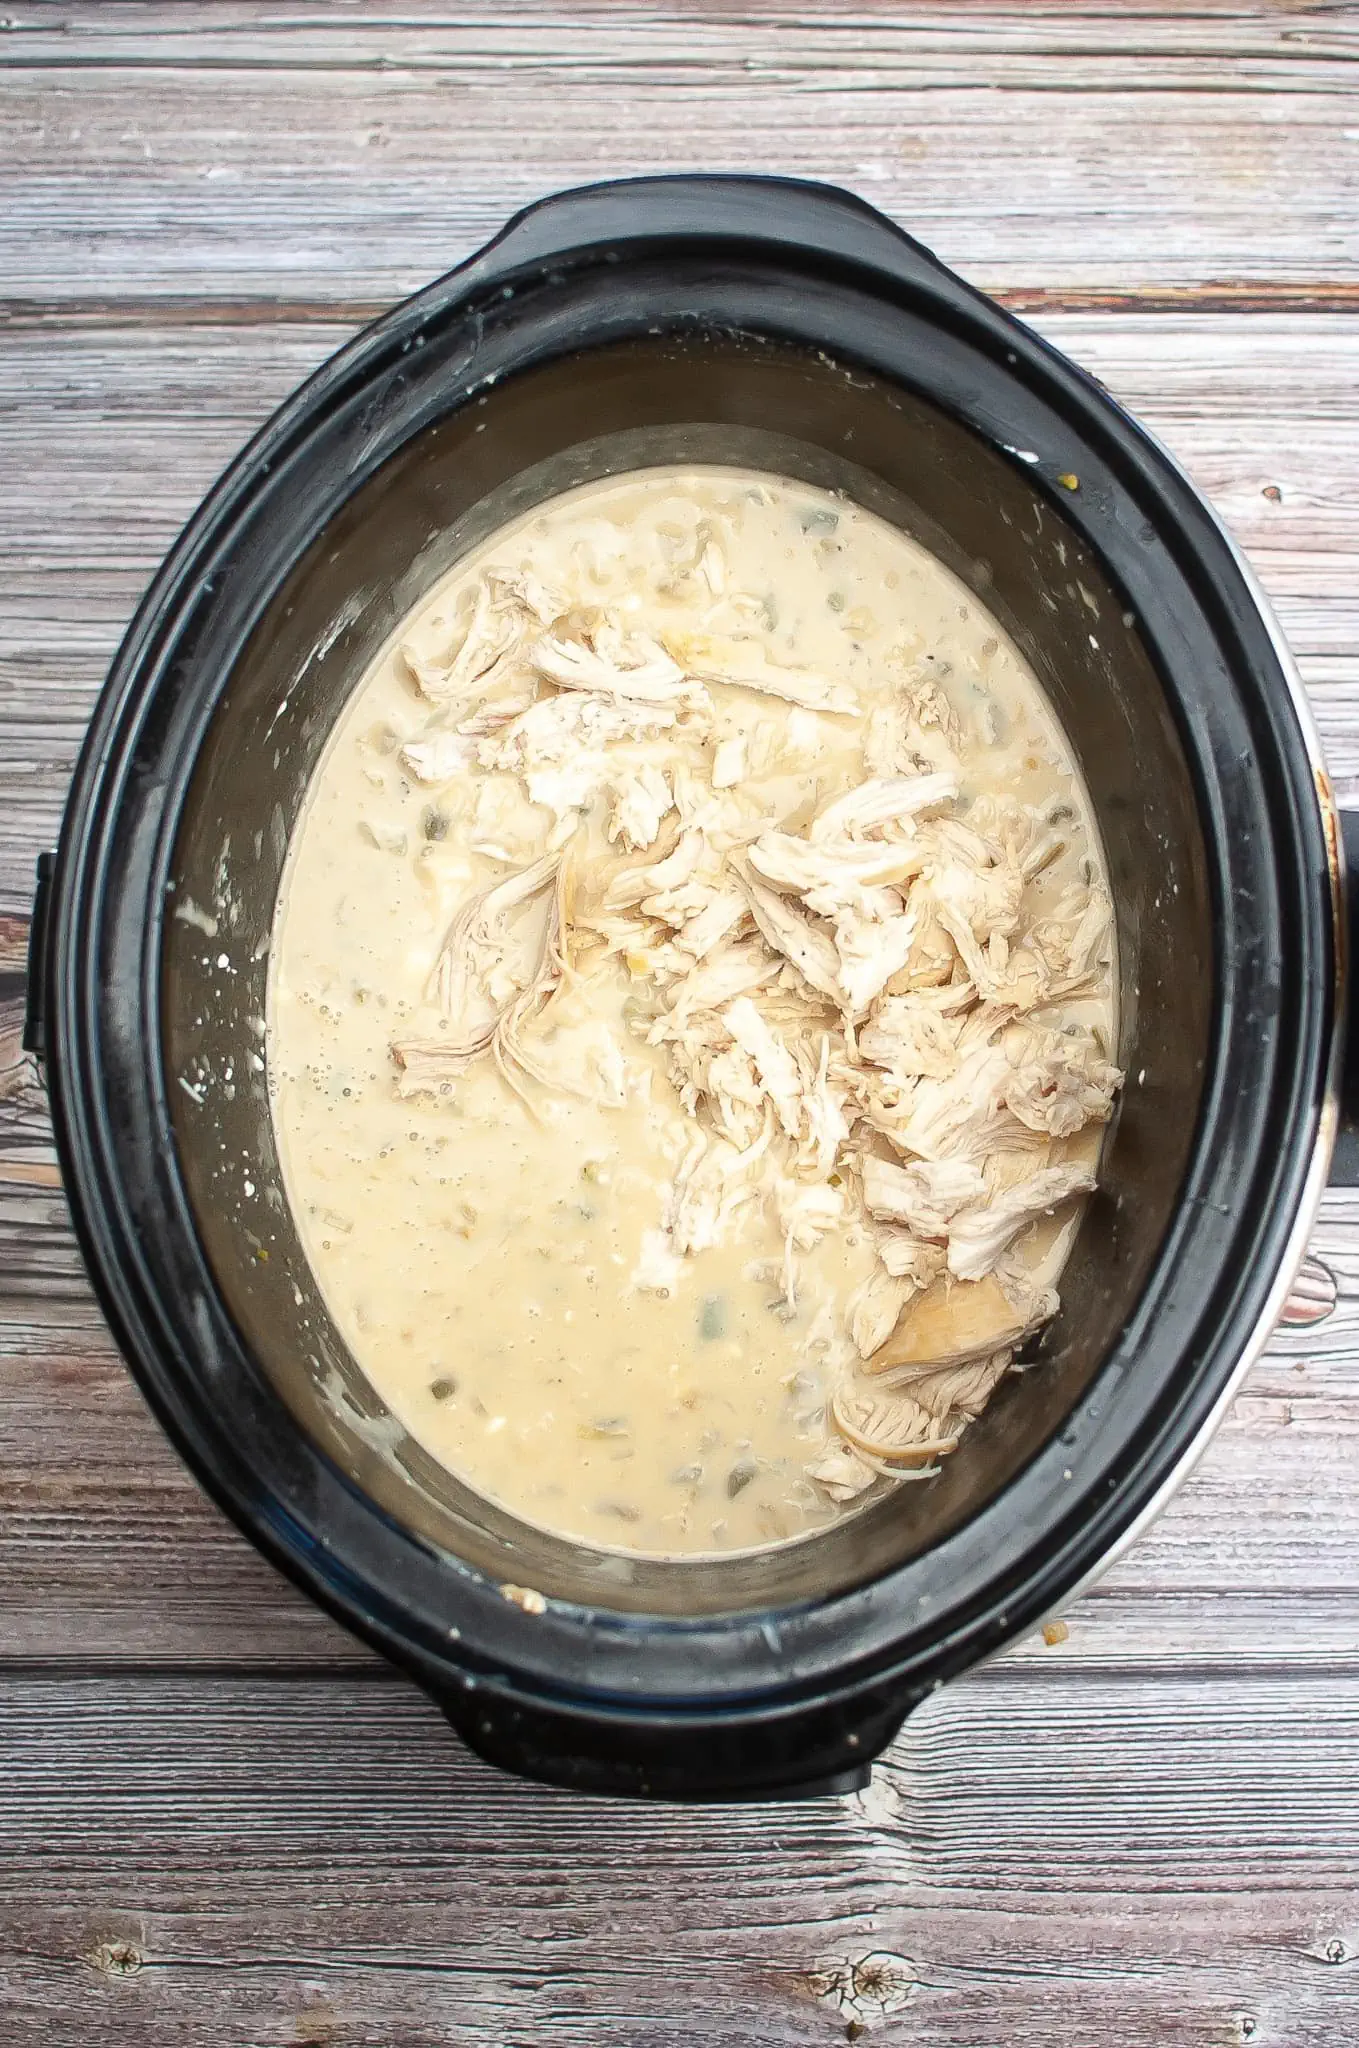 White Chicken Chili in a slow cooker on a wooden table.